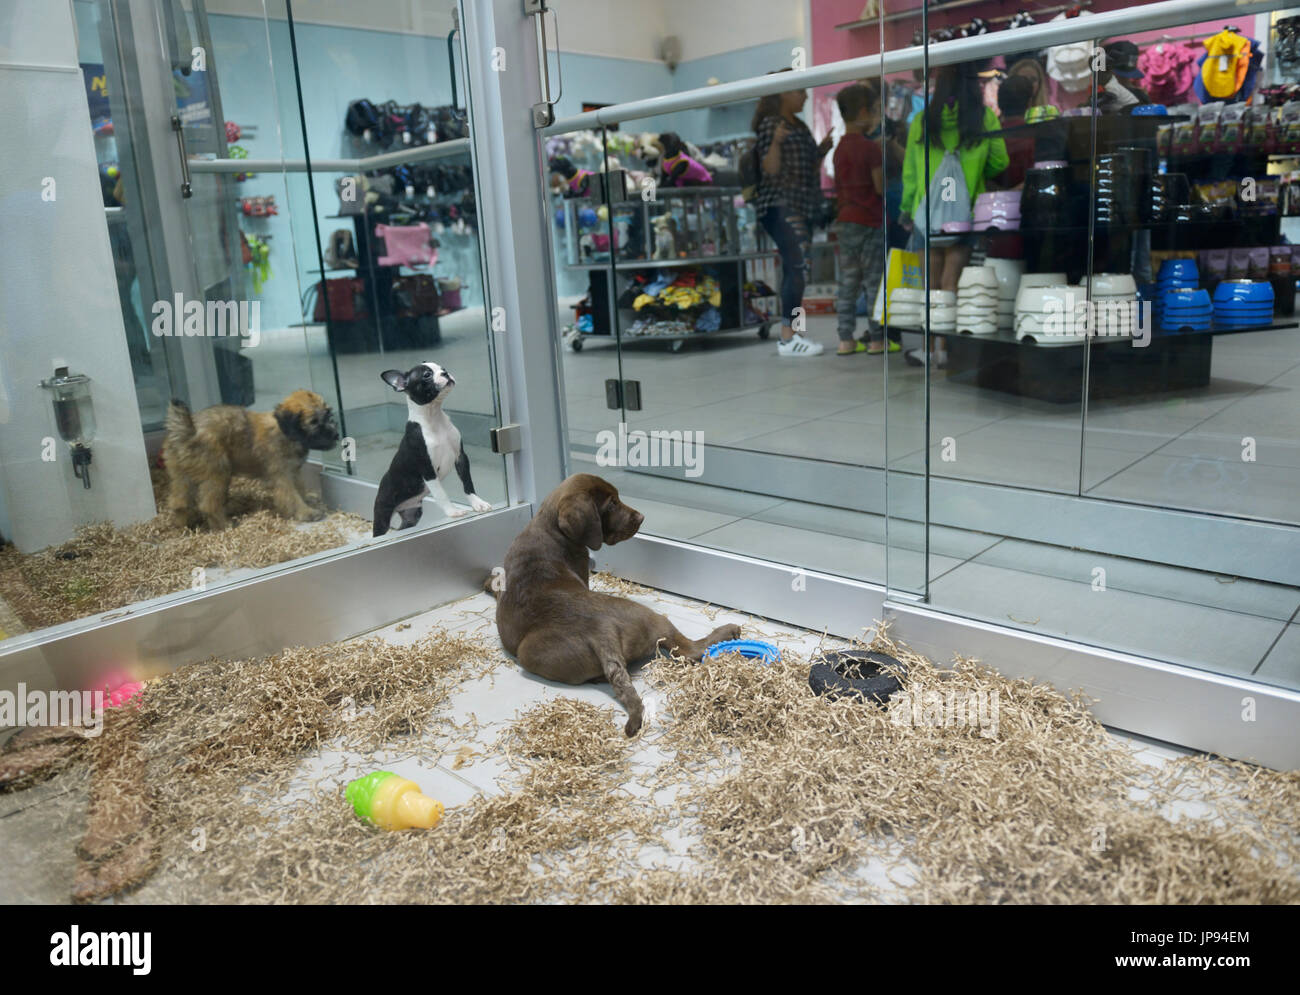 puppies for sale at a pet store in a mall northern nj chocolate lab puppy in foreground stock photo alamy